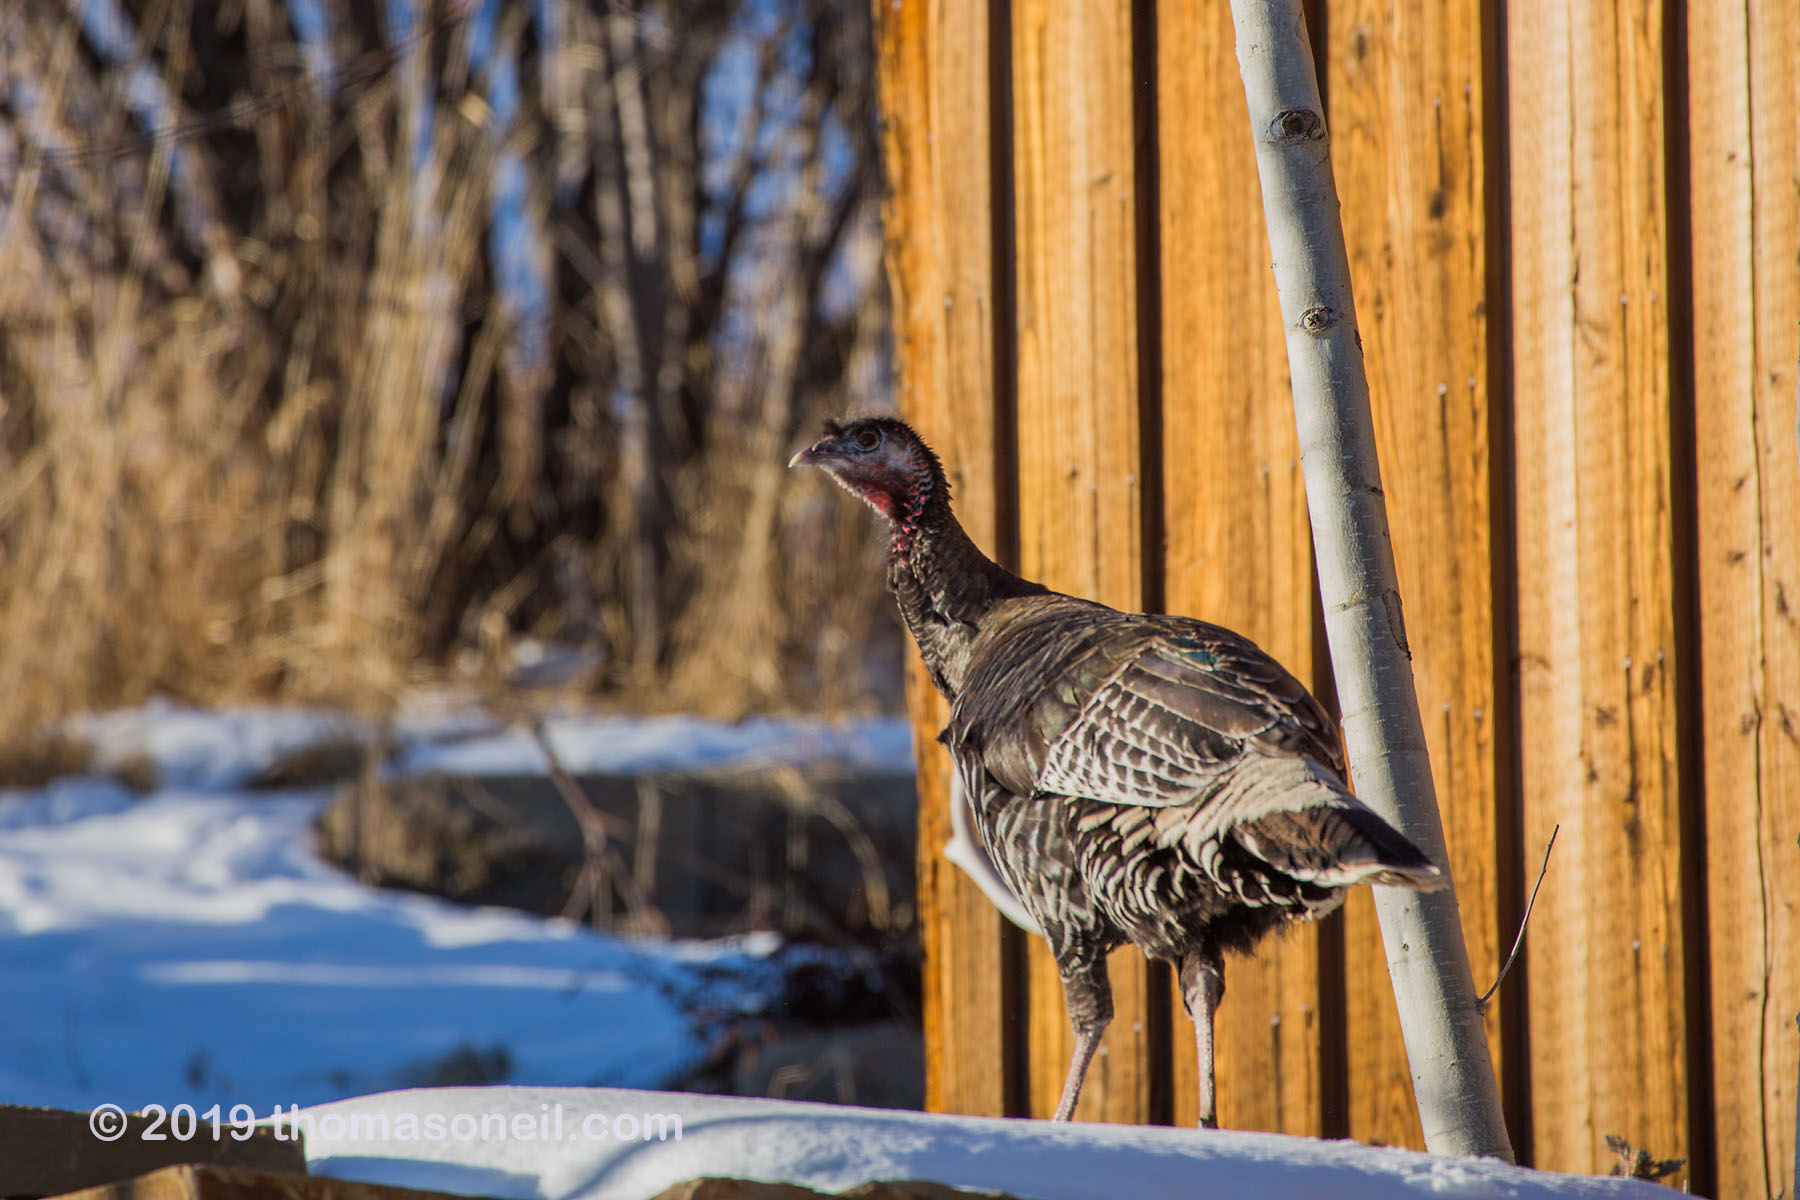 Not all wildlife is in the parks.  Red Lodge, MT is overrun with dozens of turkeys.  Click for next photo.